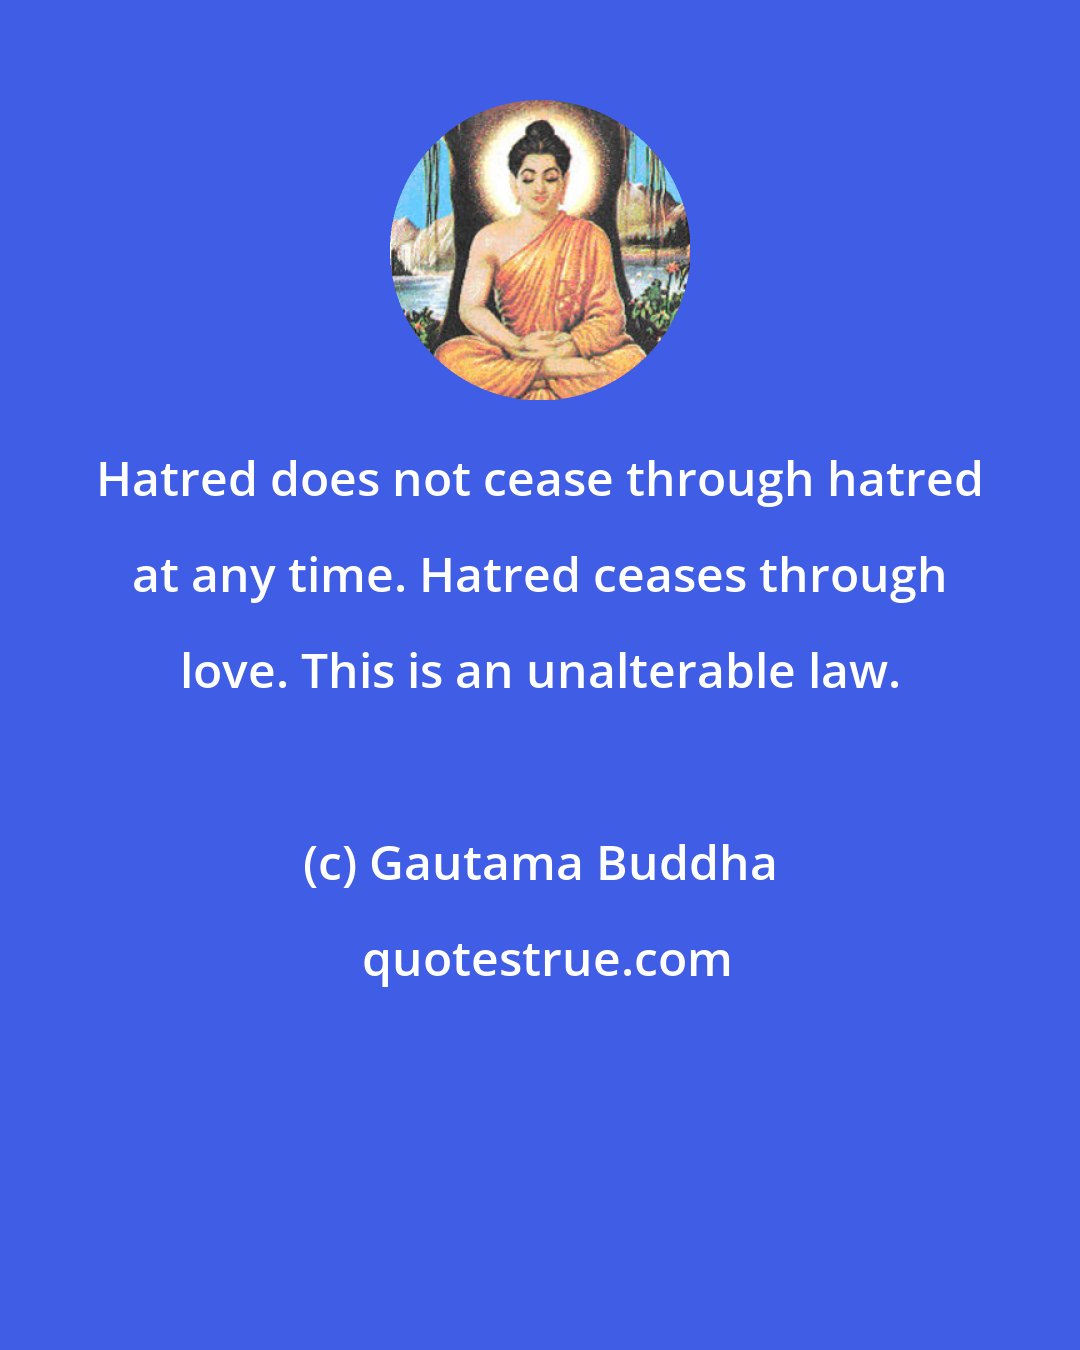 Gautama Buddha: Hatred does not cease through hatred at any time. Hatred ceases through love. This is an unalterable law.